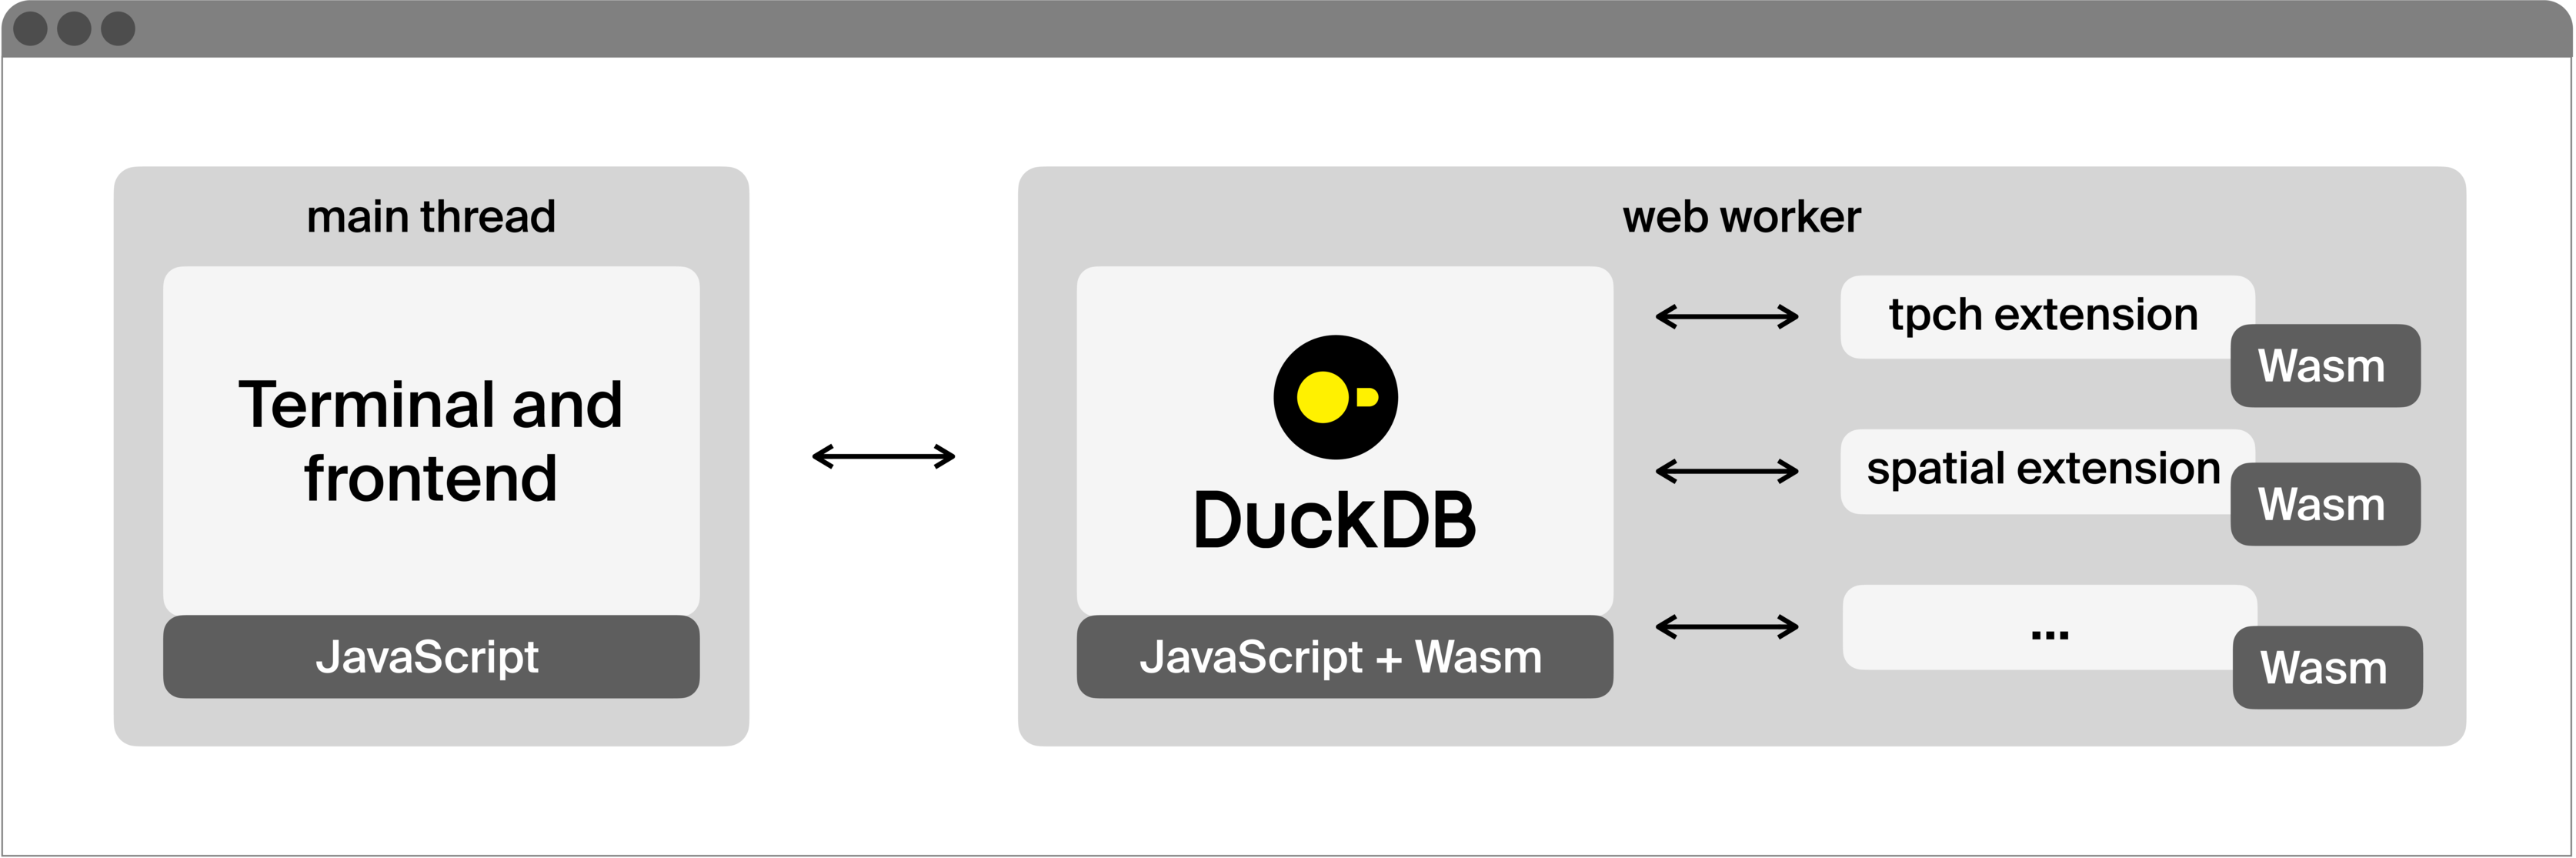 Overview of the architecture of DuckDB-Wasm with extensions